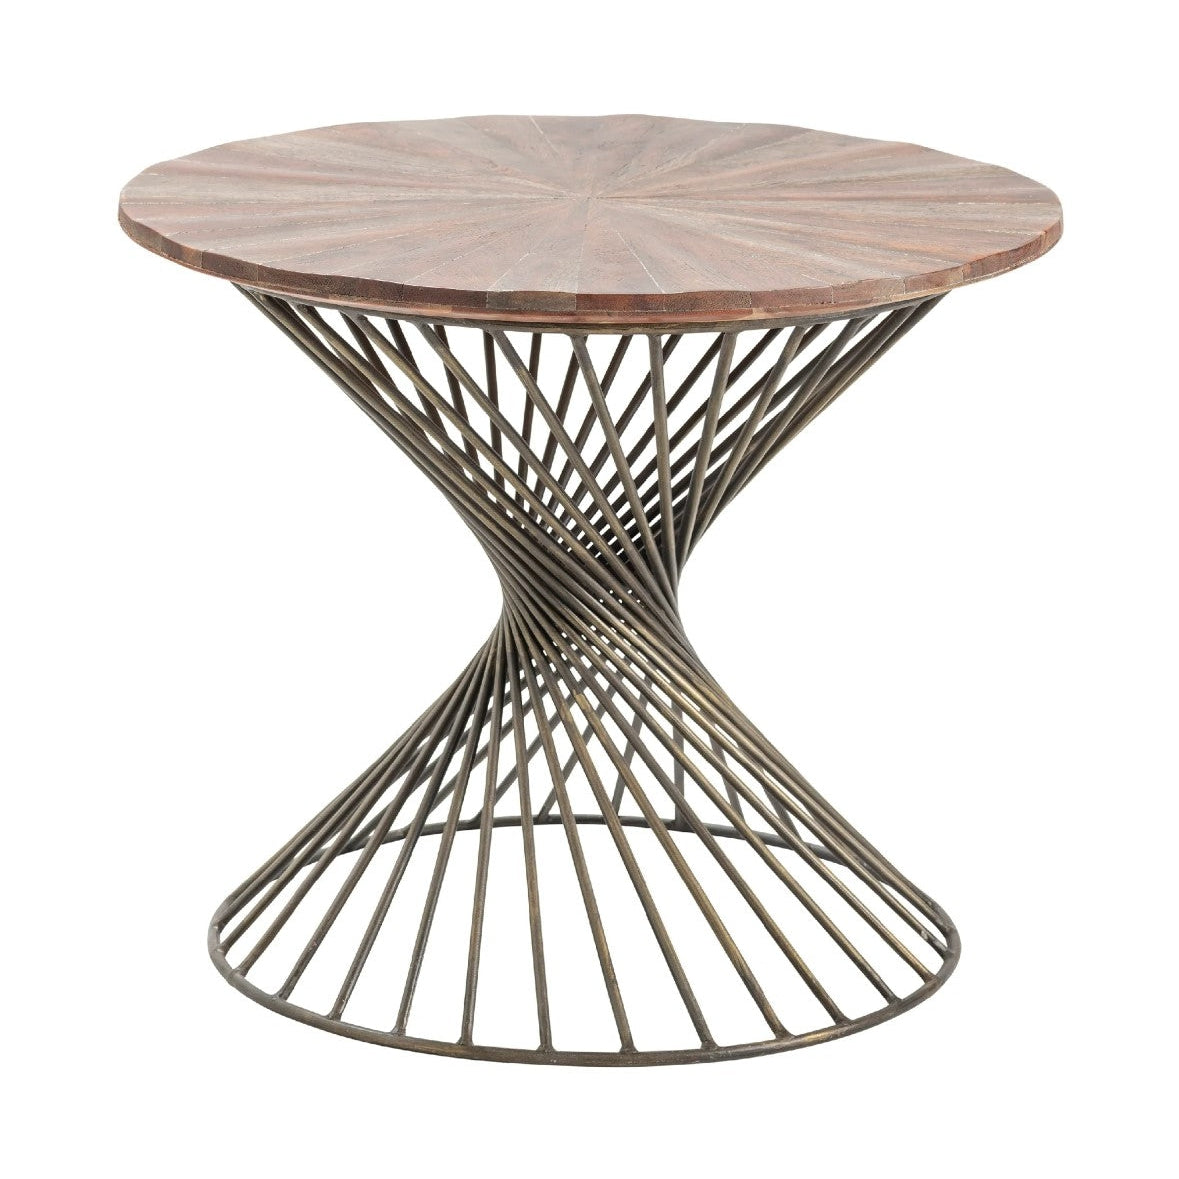 Crestview Collection Bengal Manor 25" x 25" x 21" Rustic Pie-Cut Wood Top And Twist Metal Round Accent Table In Natural Wood Finish